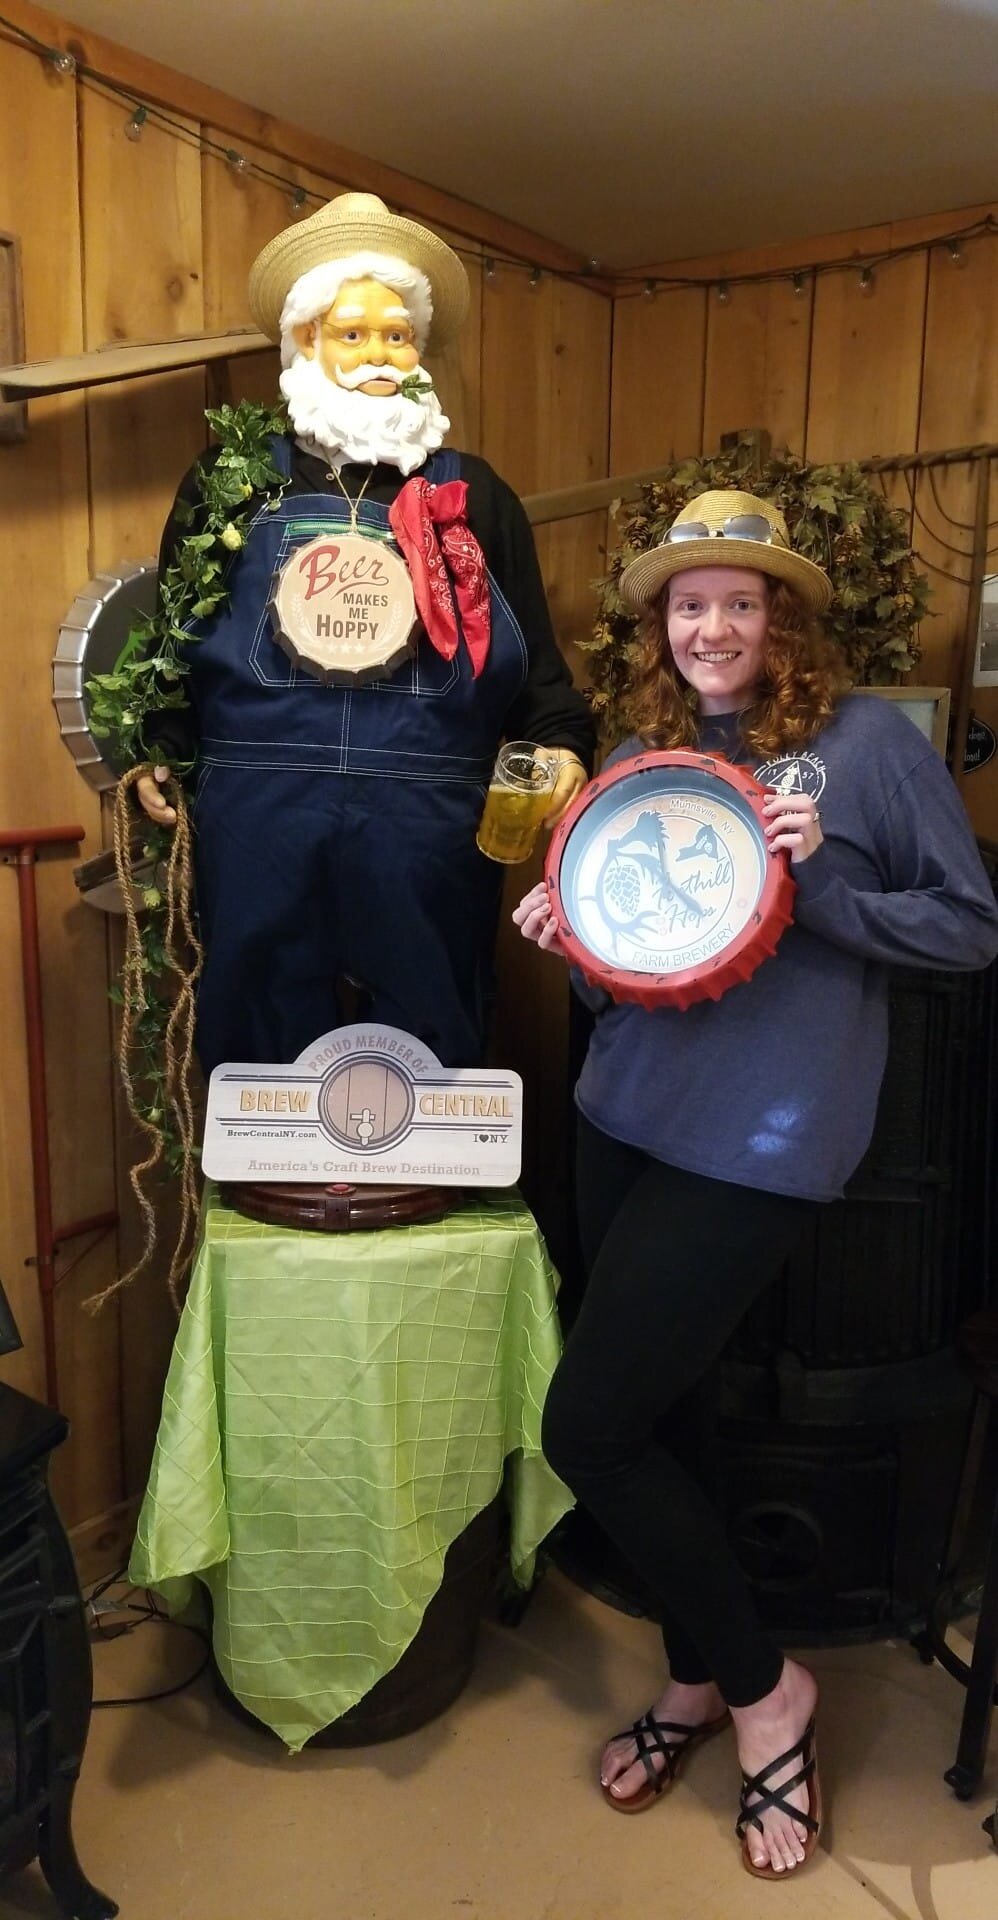 Animated Santa figure wearing overalls for harvest time with woman holding Foothill Hops branded clock.